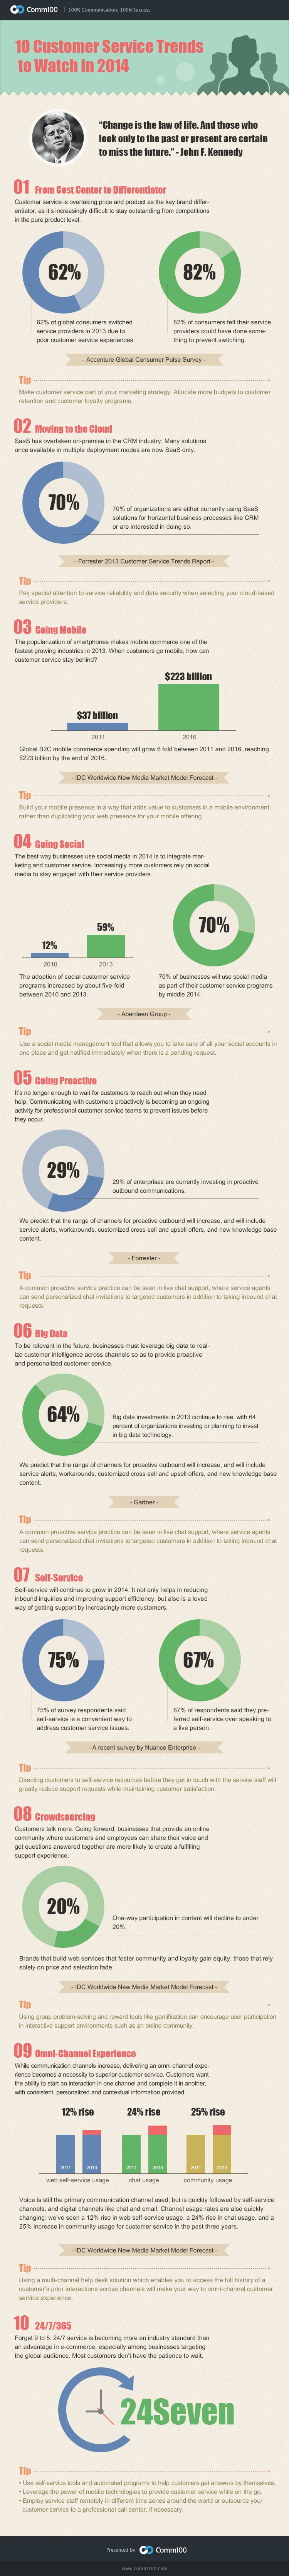 2014 customer service trends - infographic